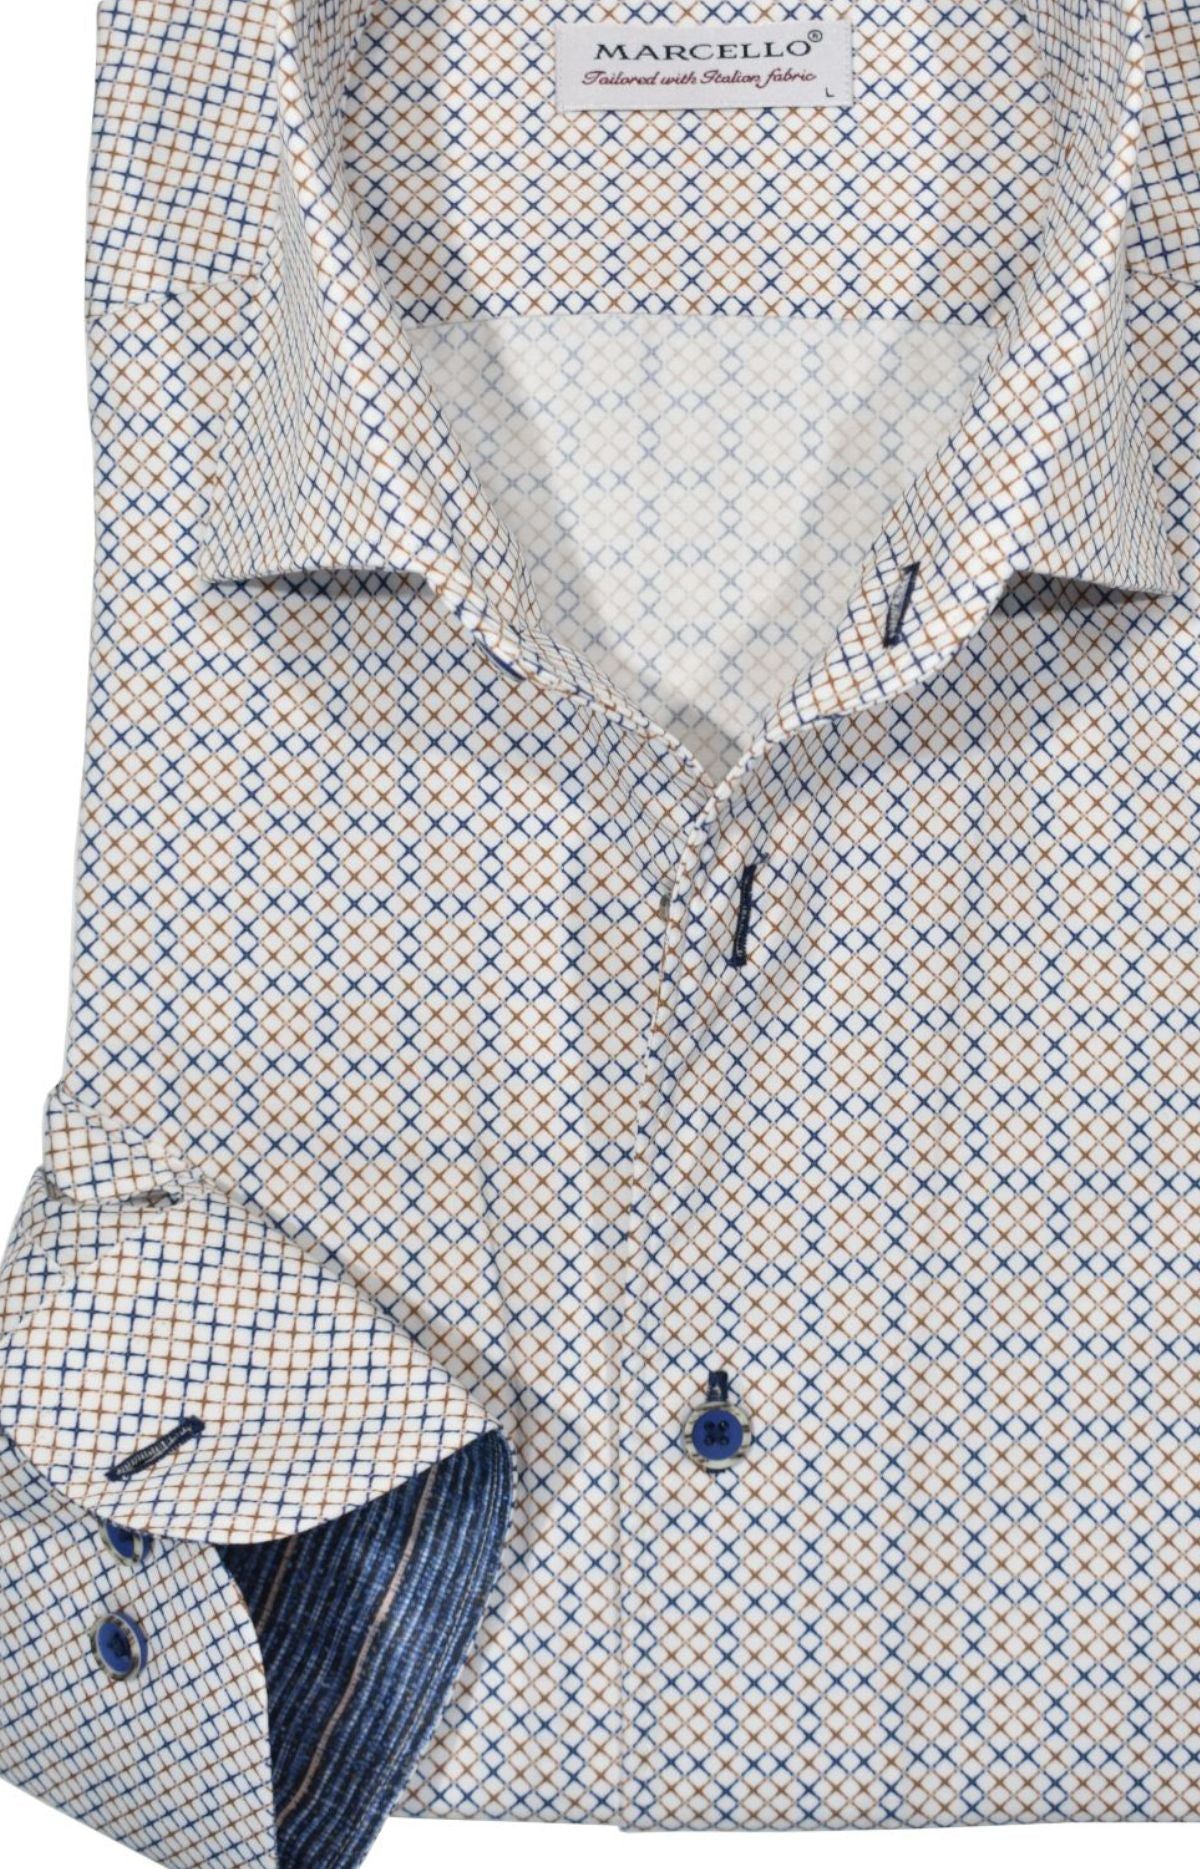 The W705R Tack Open Roll Collar has been expertly crafted with the Marcello one piece, roll collar, providing an excellent fit and an outstanding statement. The perfect complement for blue and tan bottoms, the fabric features an open x pattern in soft tan and blue, perfectly matched with custom buttons and cuff trim fabric. Soft cotton fabric and a classic shape make this a timeless addition to any wardrobe. by Marcello